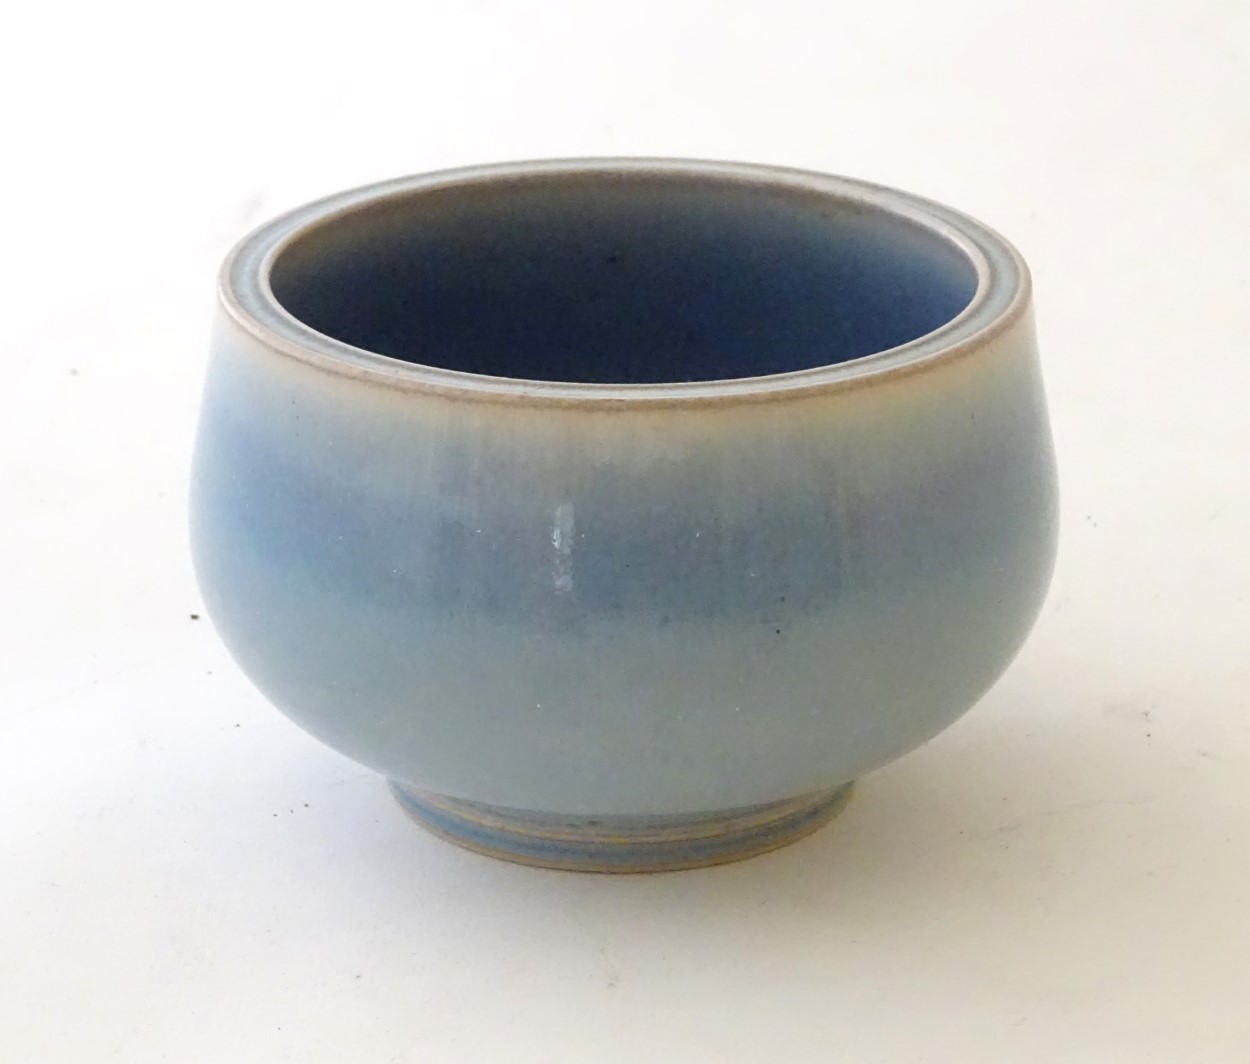 An unmarked high fired blue glazed bowl. Approx. 3" high.